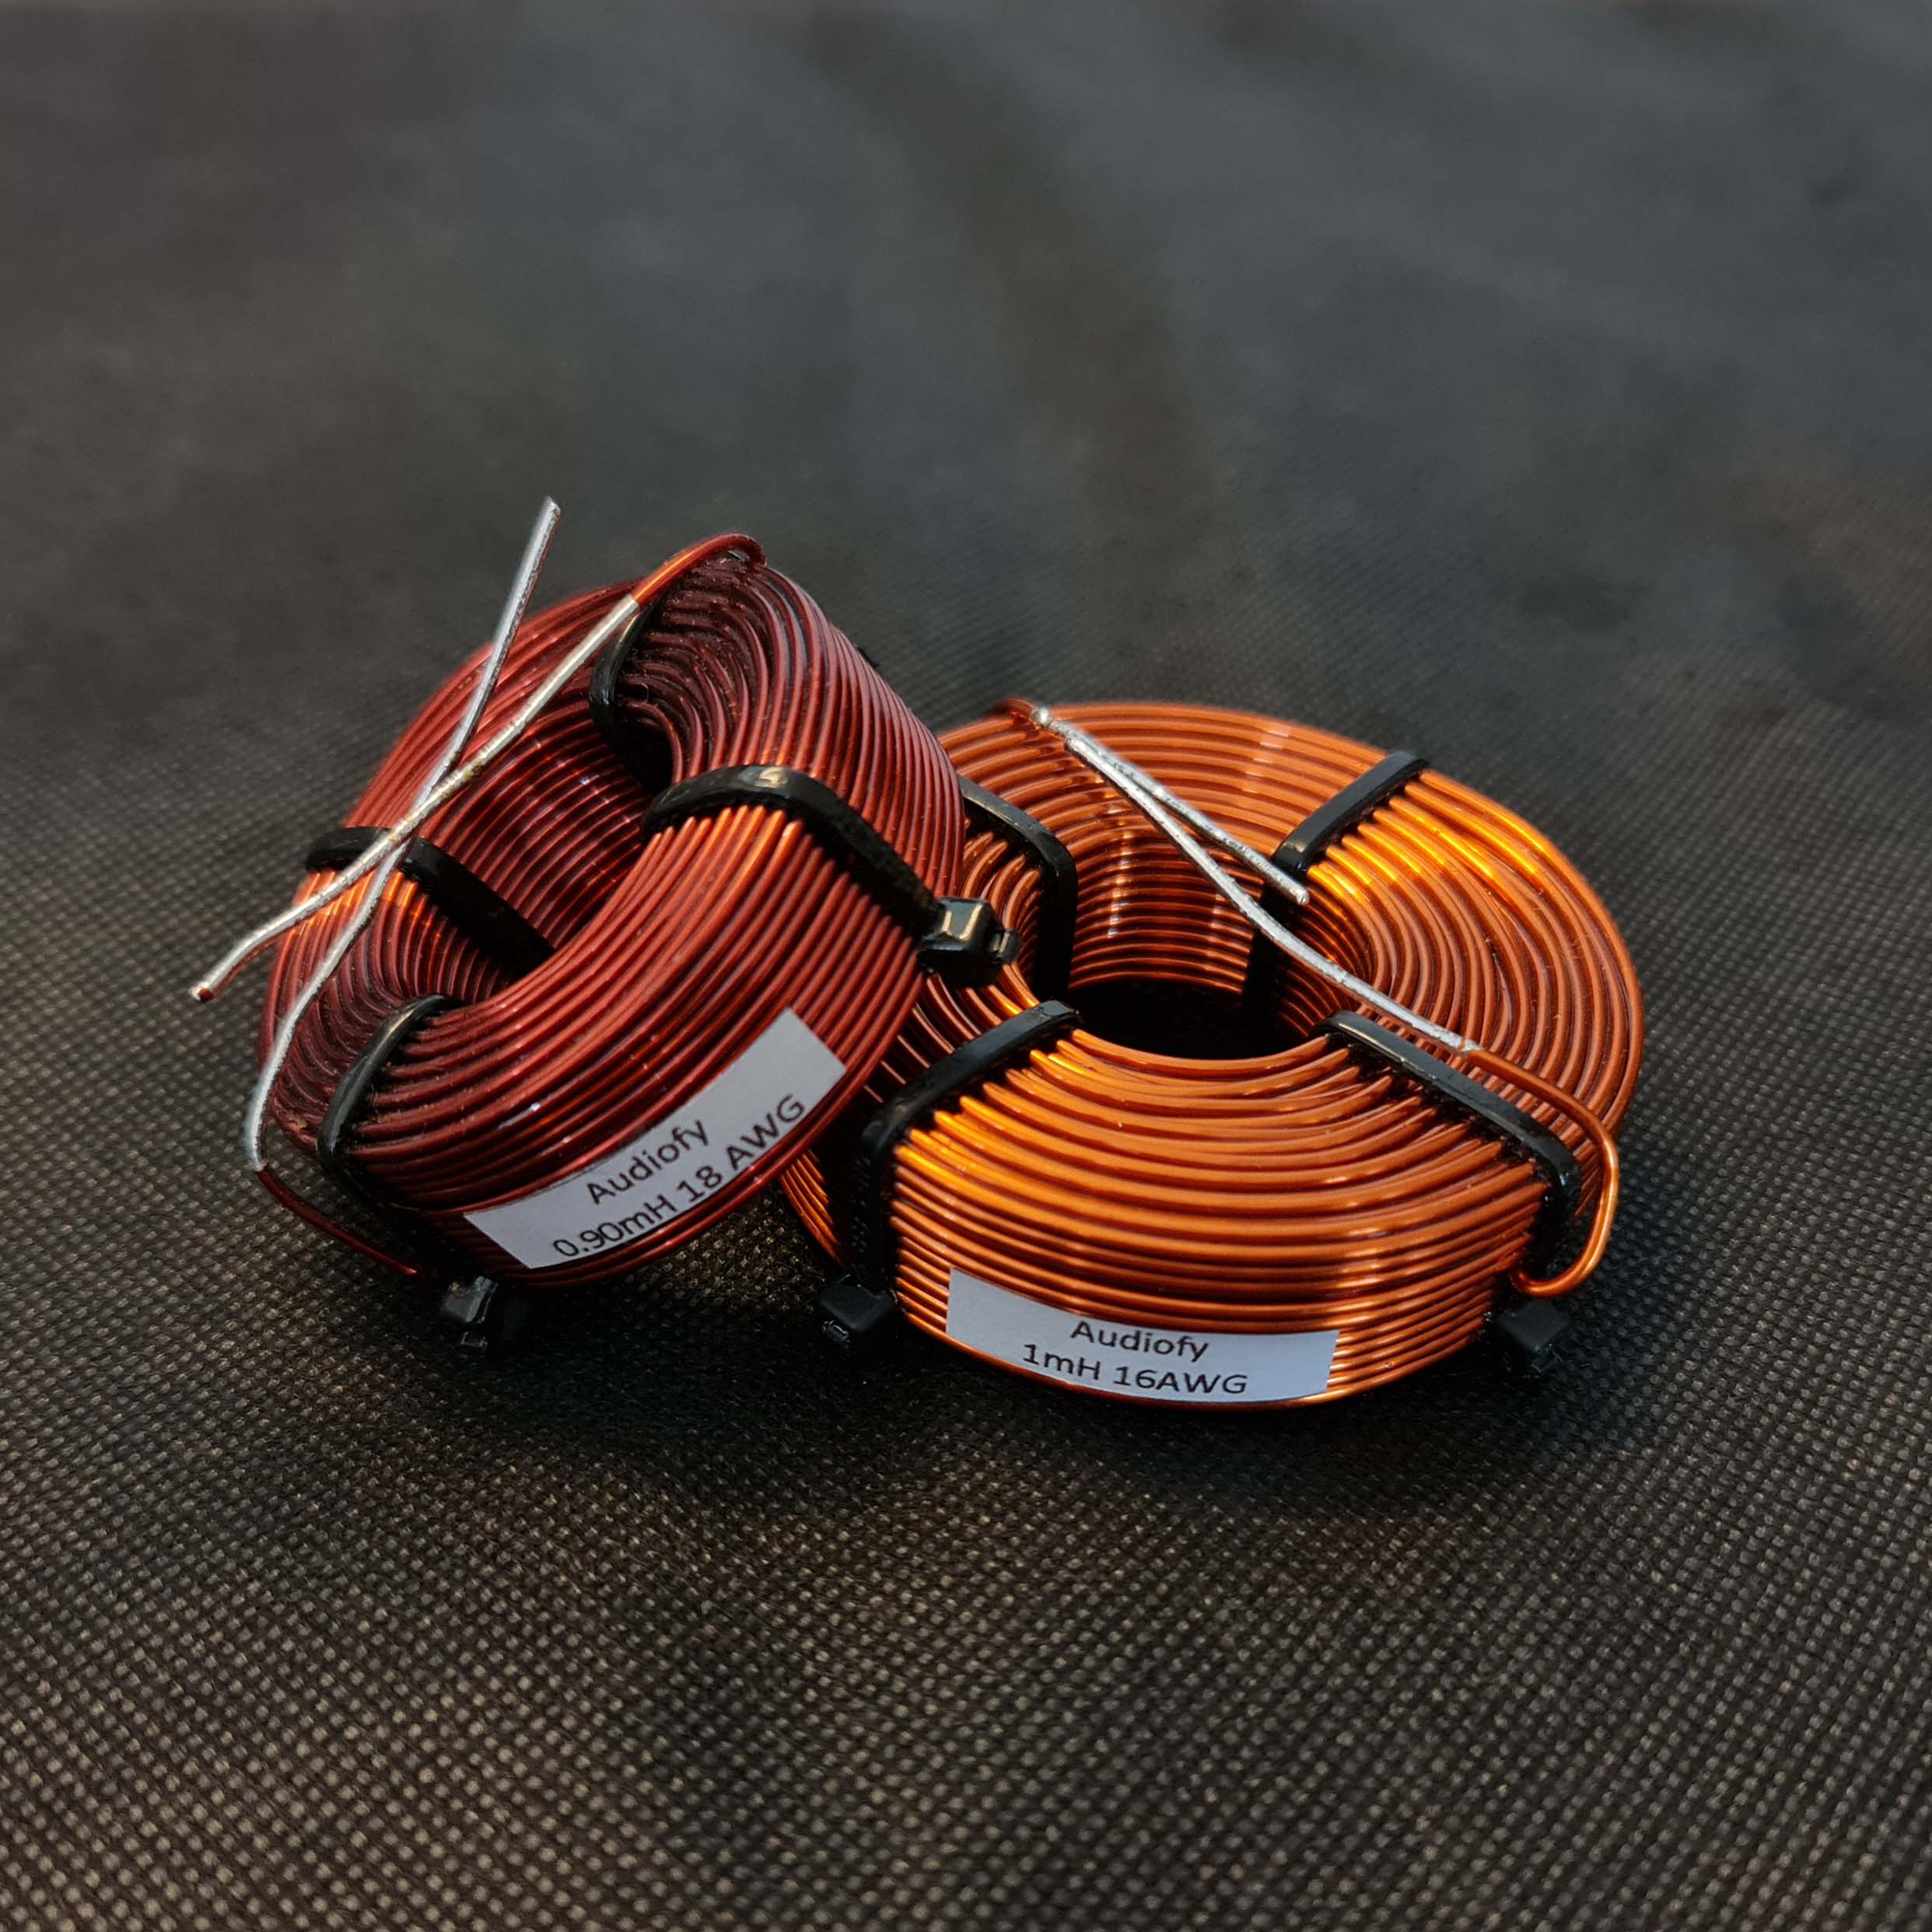 Audiofy 0.30mH 16 AWG Air Core Crossover Inductor